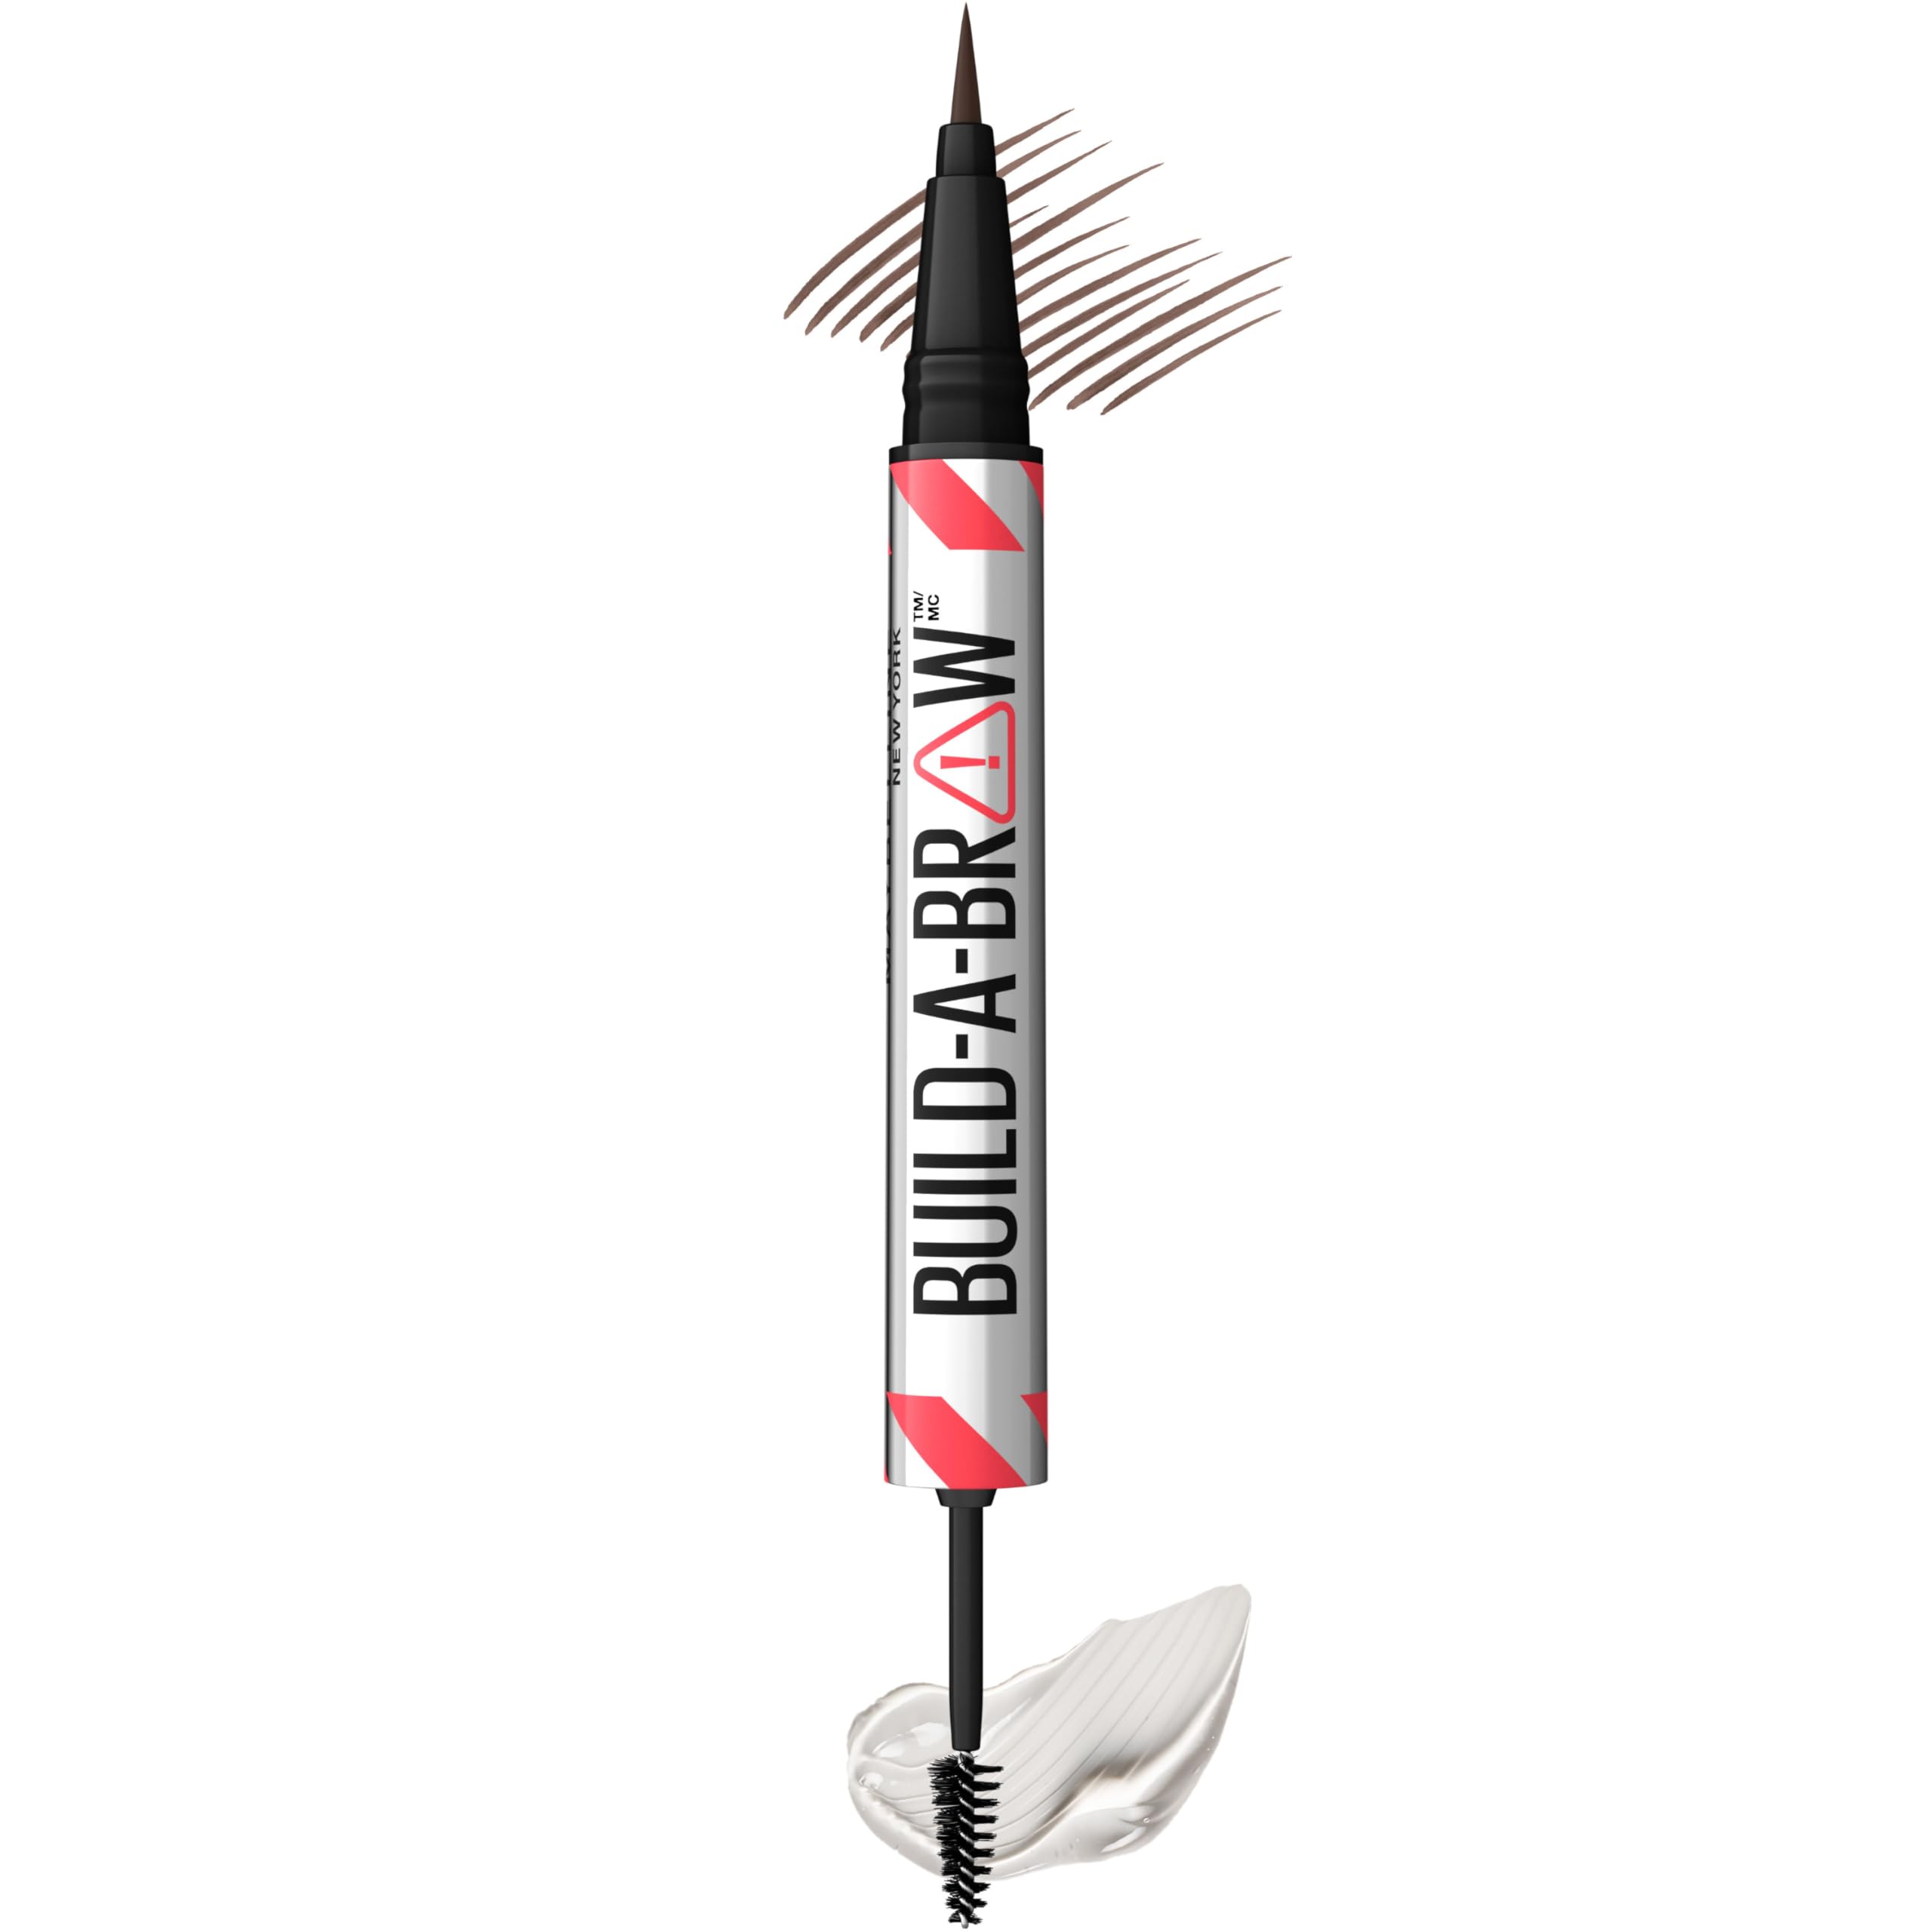 Maybelline Build-A-Brow 2-in-1 Brow Pen and Sealing Brow Gel, Eyebrow Makeup for Real-Looking, Fuller Eyebrows, Deep Brown, 1 Count